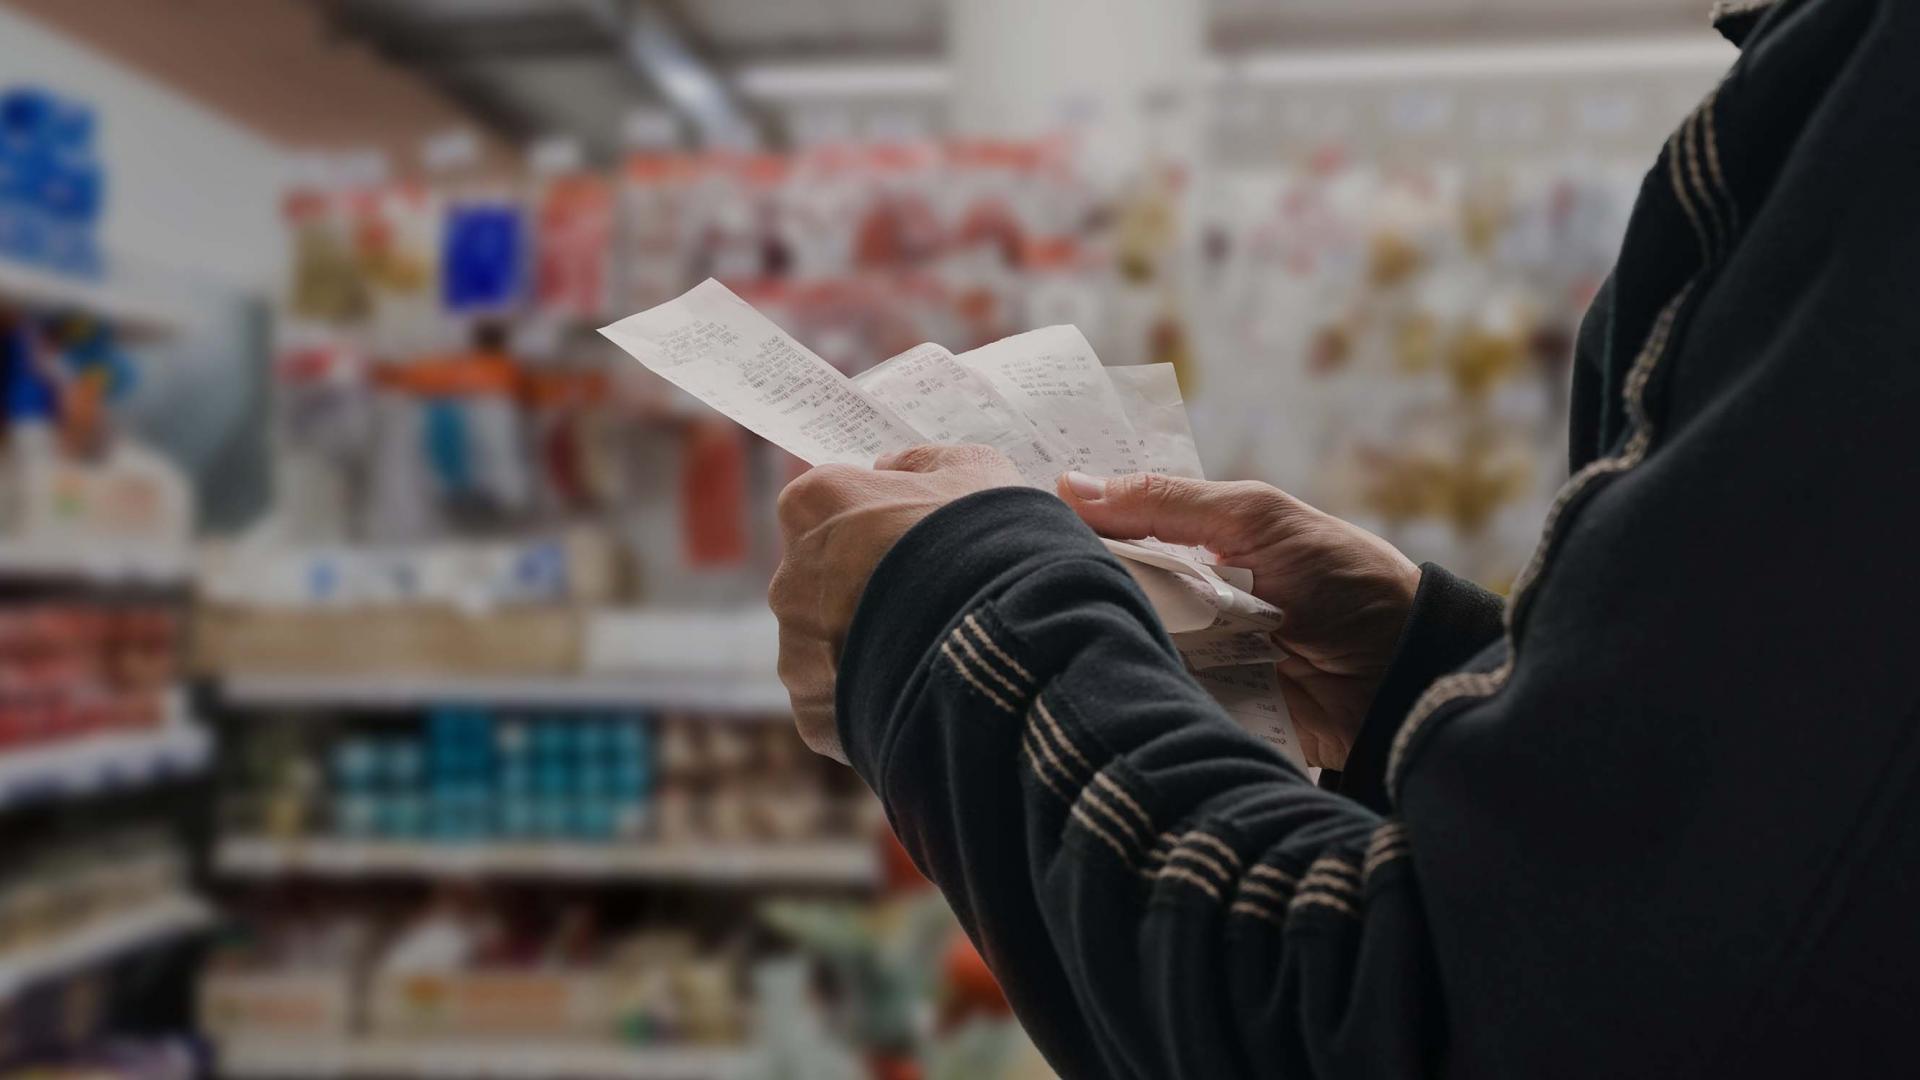 Man holding receipts in a supermarket